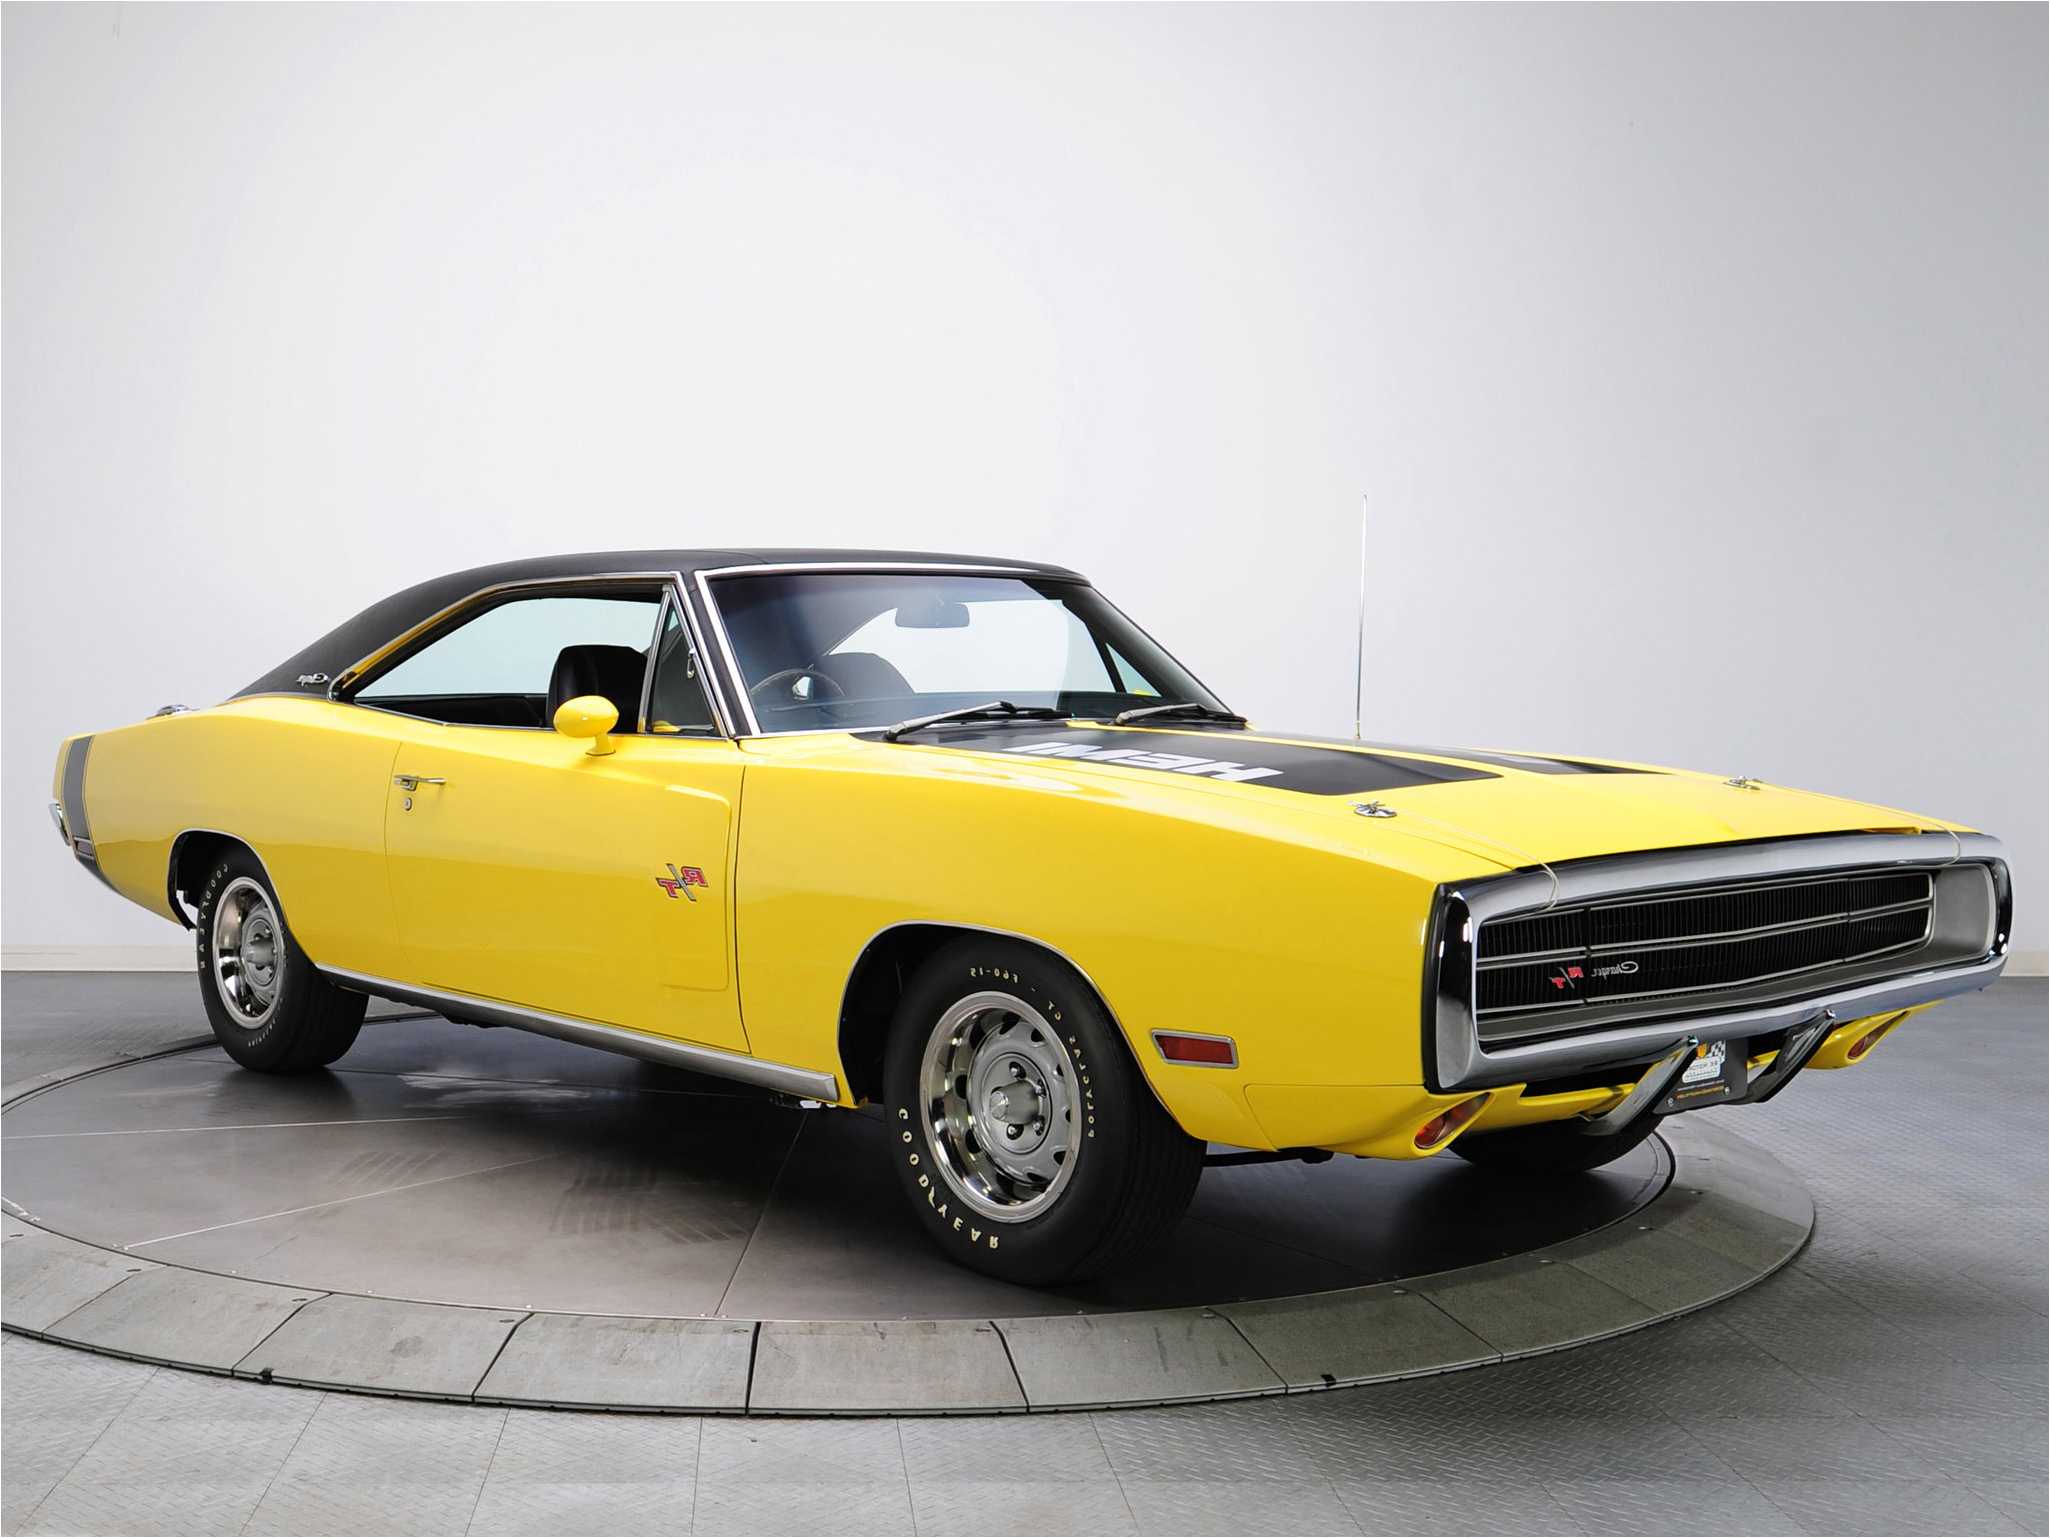 Download In Original Resolution - Yellow 1970 Dodge Charger , HD Wallpaper & Backgrounds